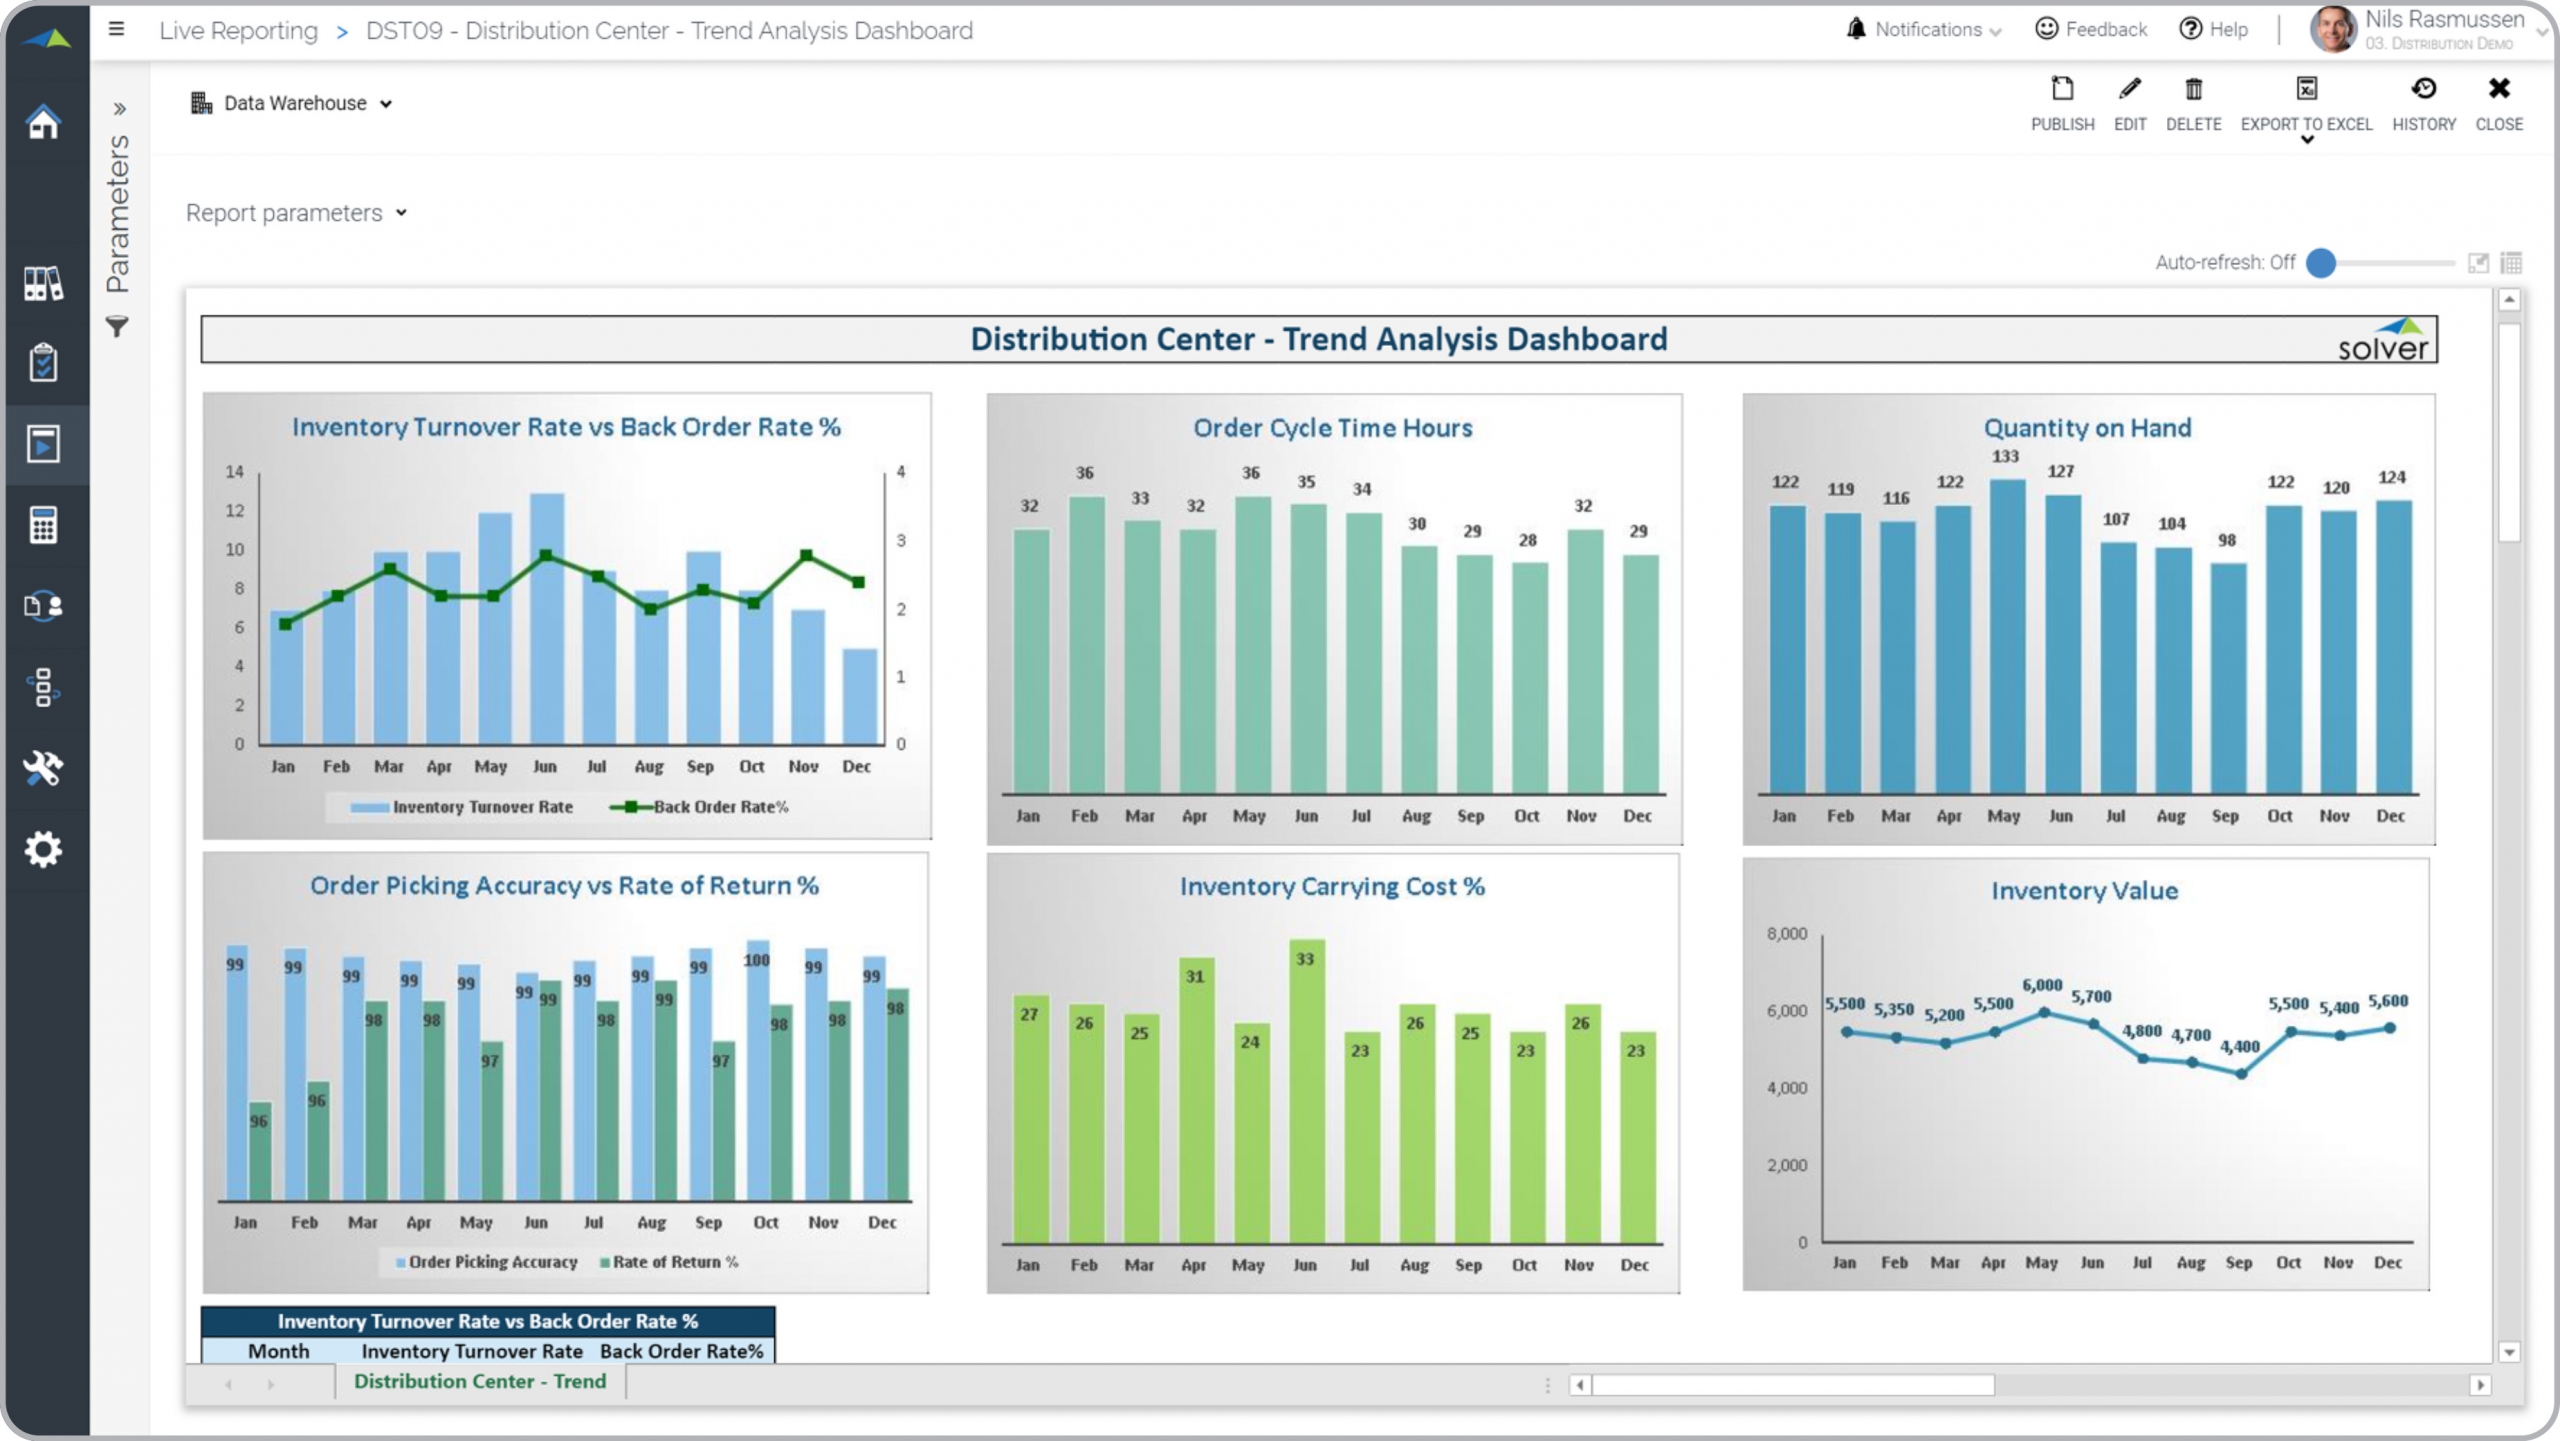 Example of a Monthly Trend Dashboard for a Distribution Center